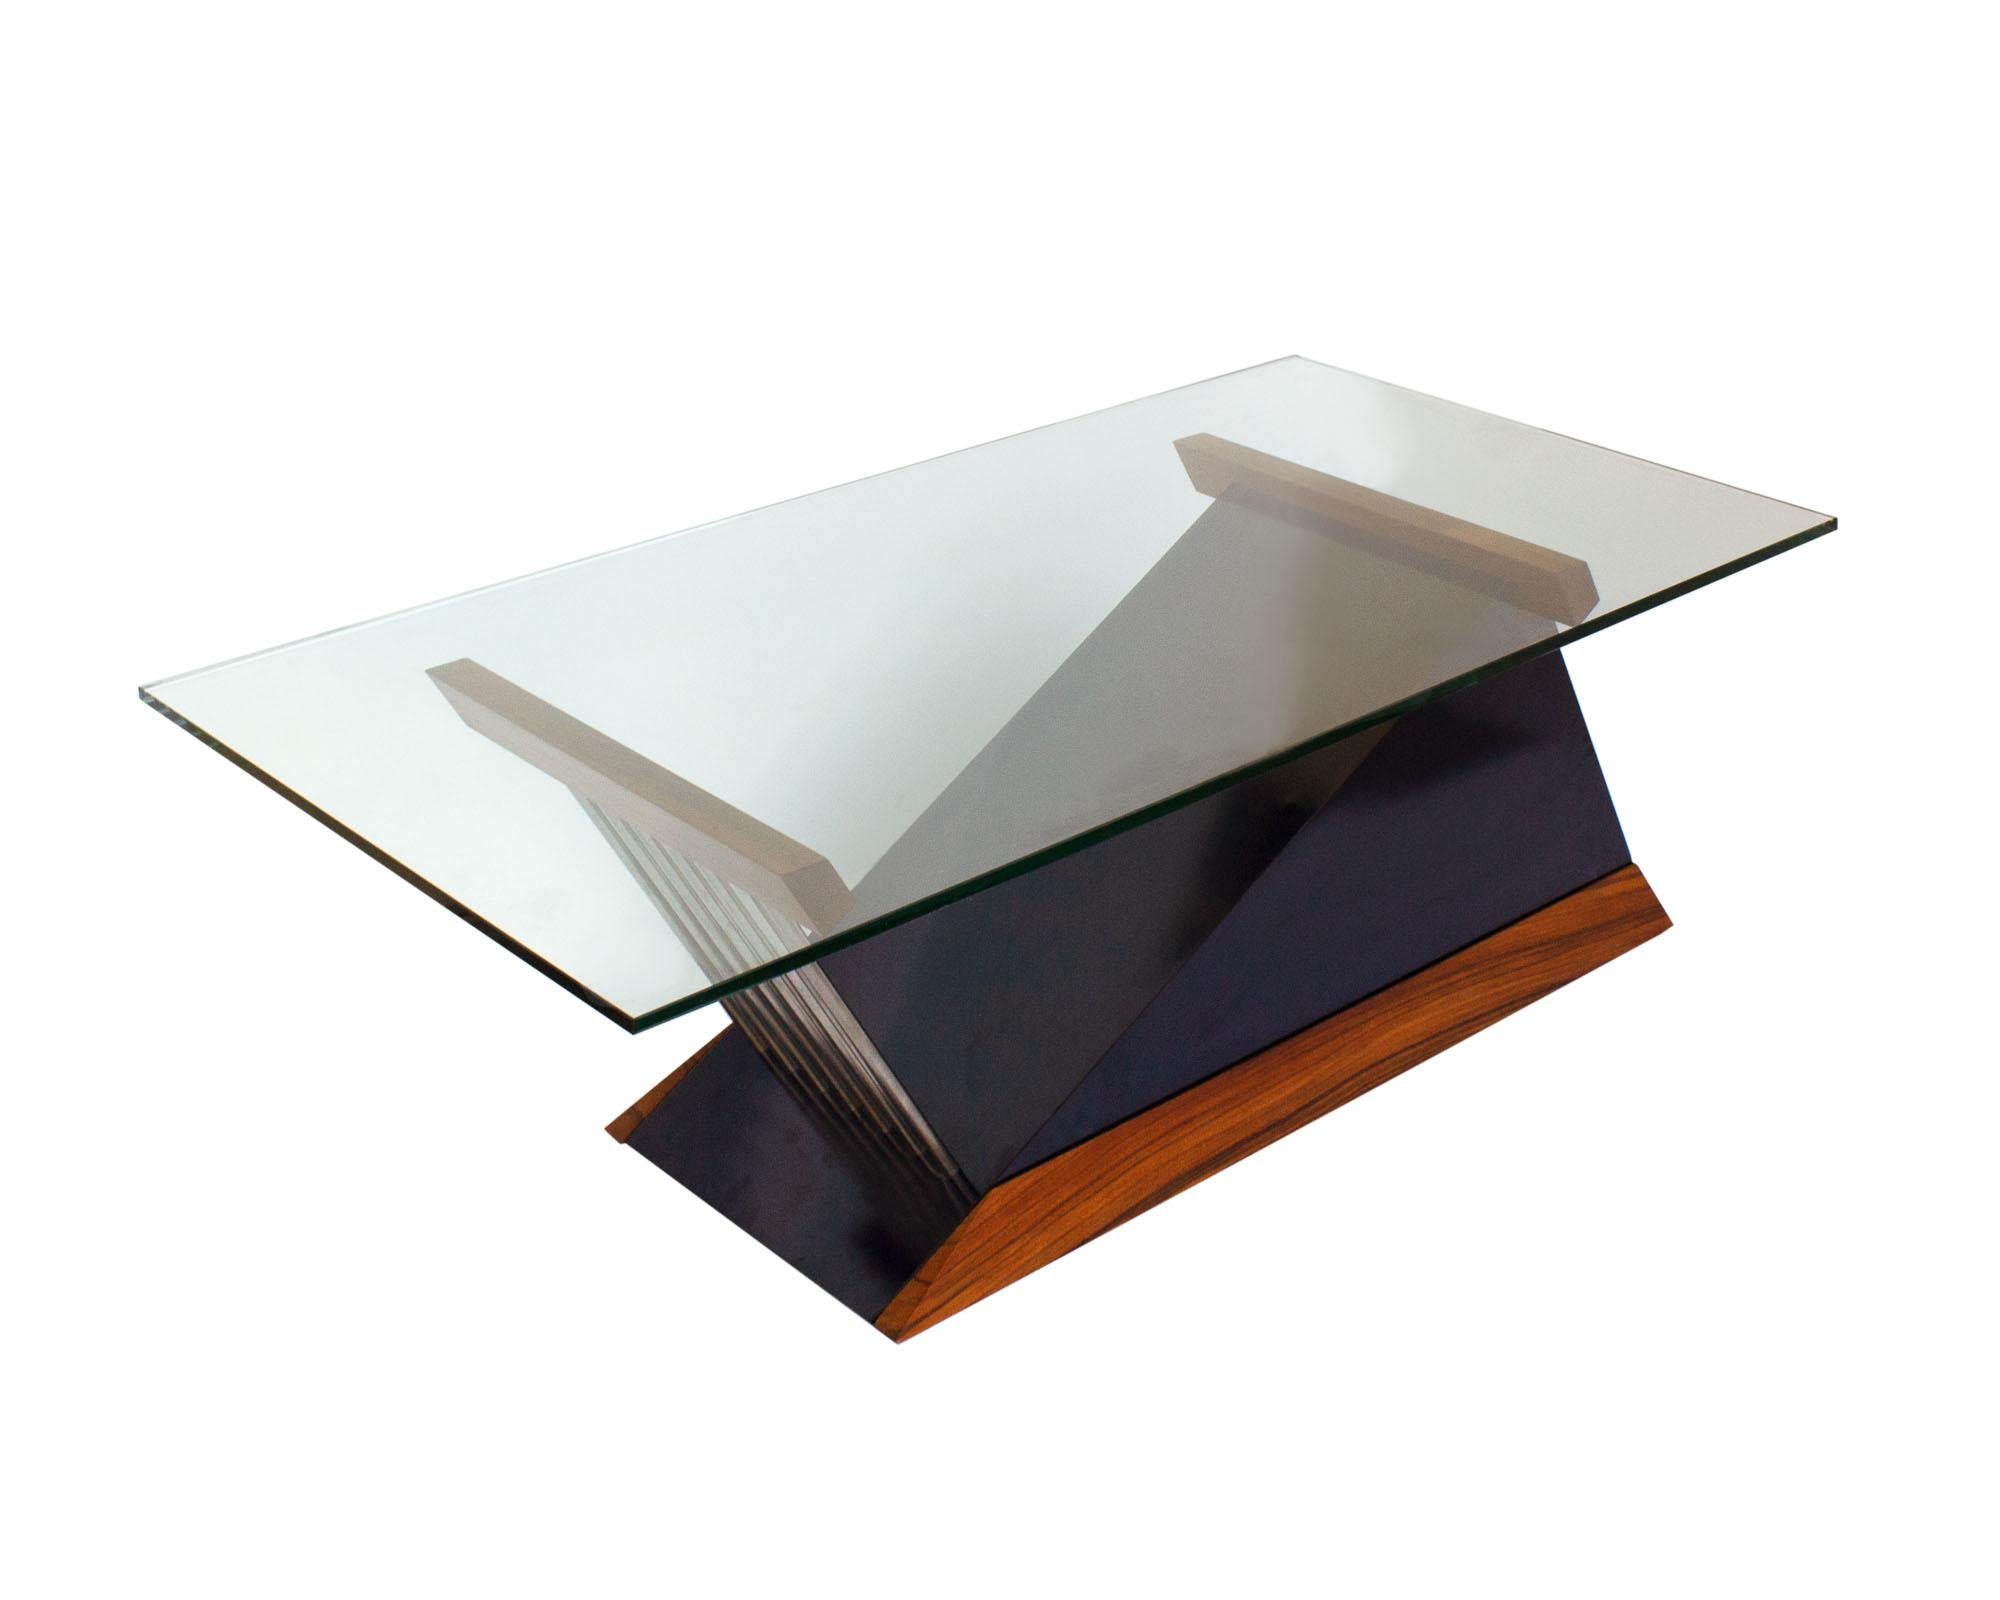 A 1986 Modernist coffee table designed by the American furniture designer Ralph K. Rye (born 1925). The table has a rectangular glass top that rests on a metal, black laminate, and wooden base. Shaped like in the form a triangle, the black laminate